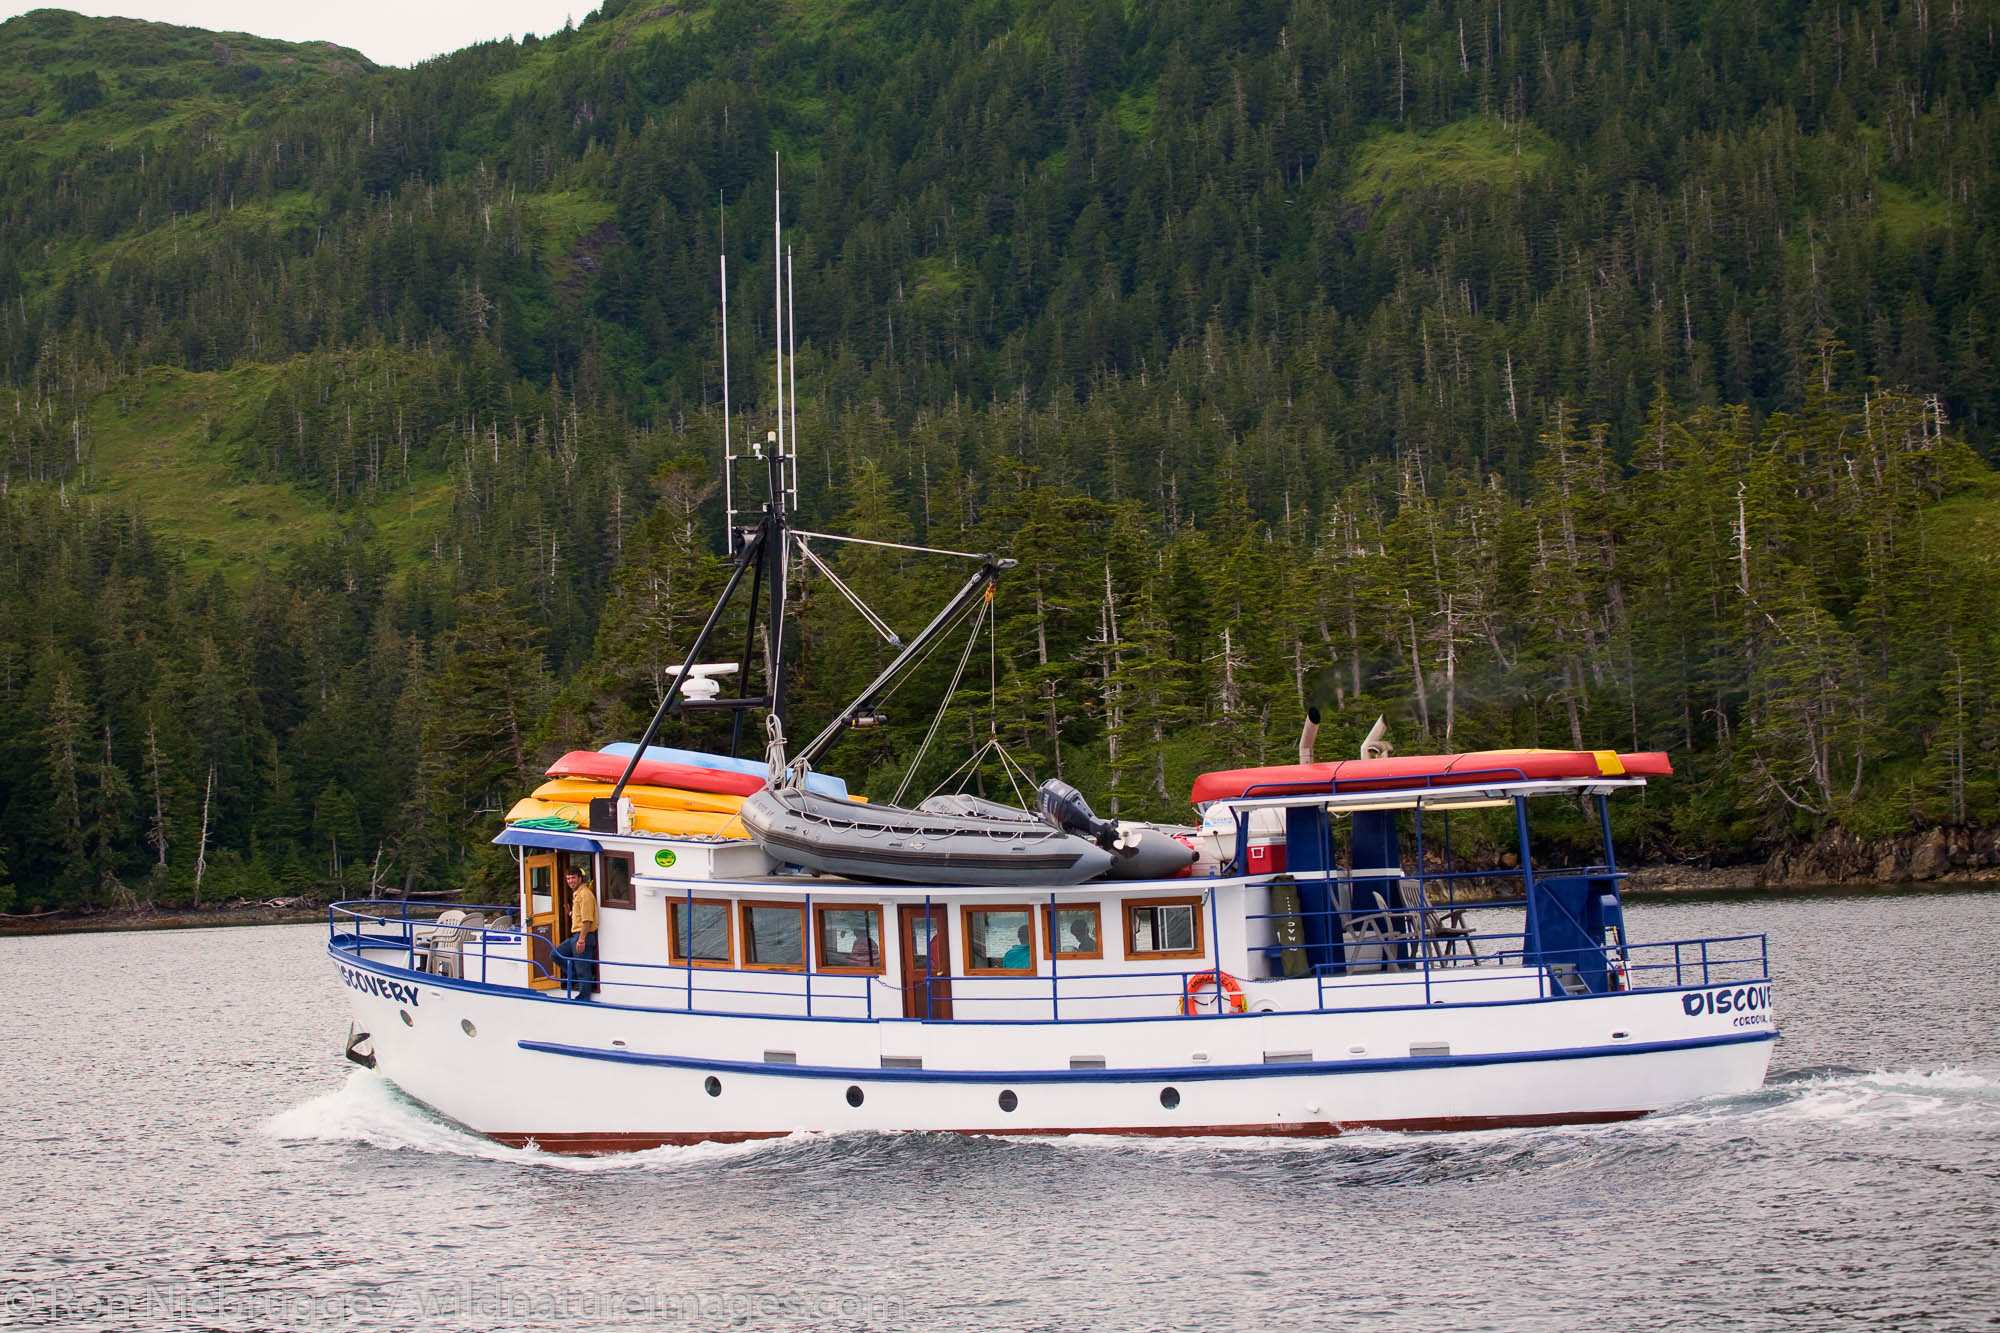 Discovery charter boat in Culross Passage, Prince William Sound, Chugach National Forest, Alaska.